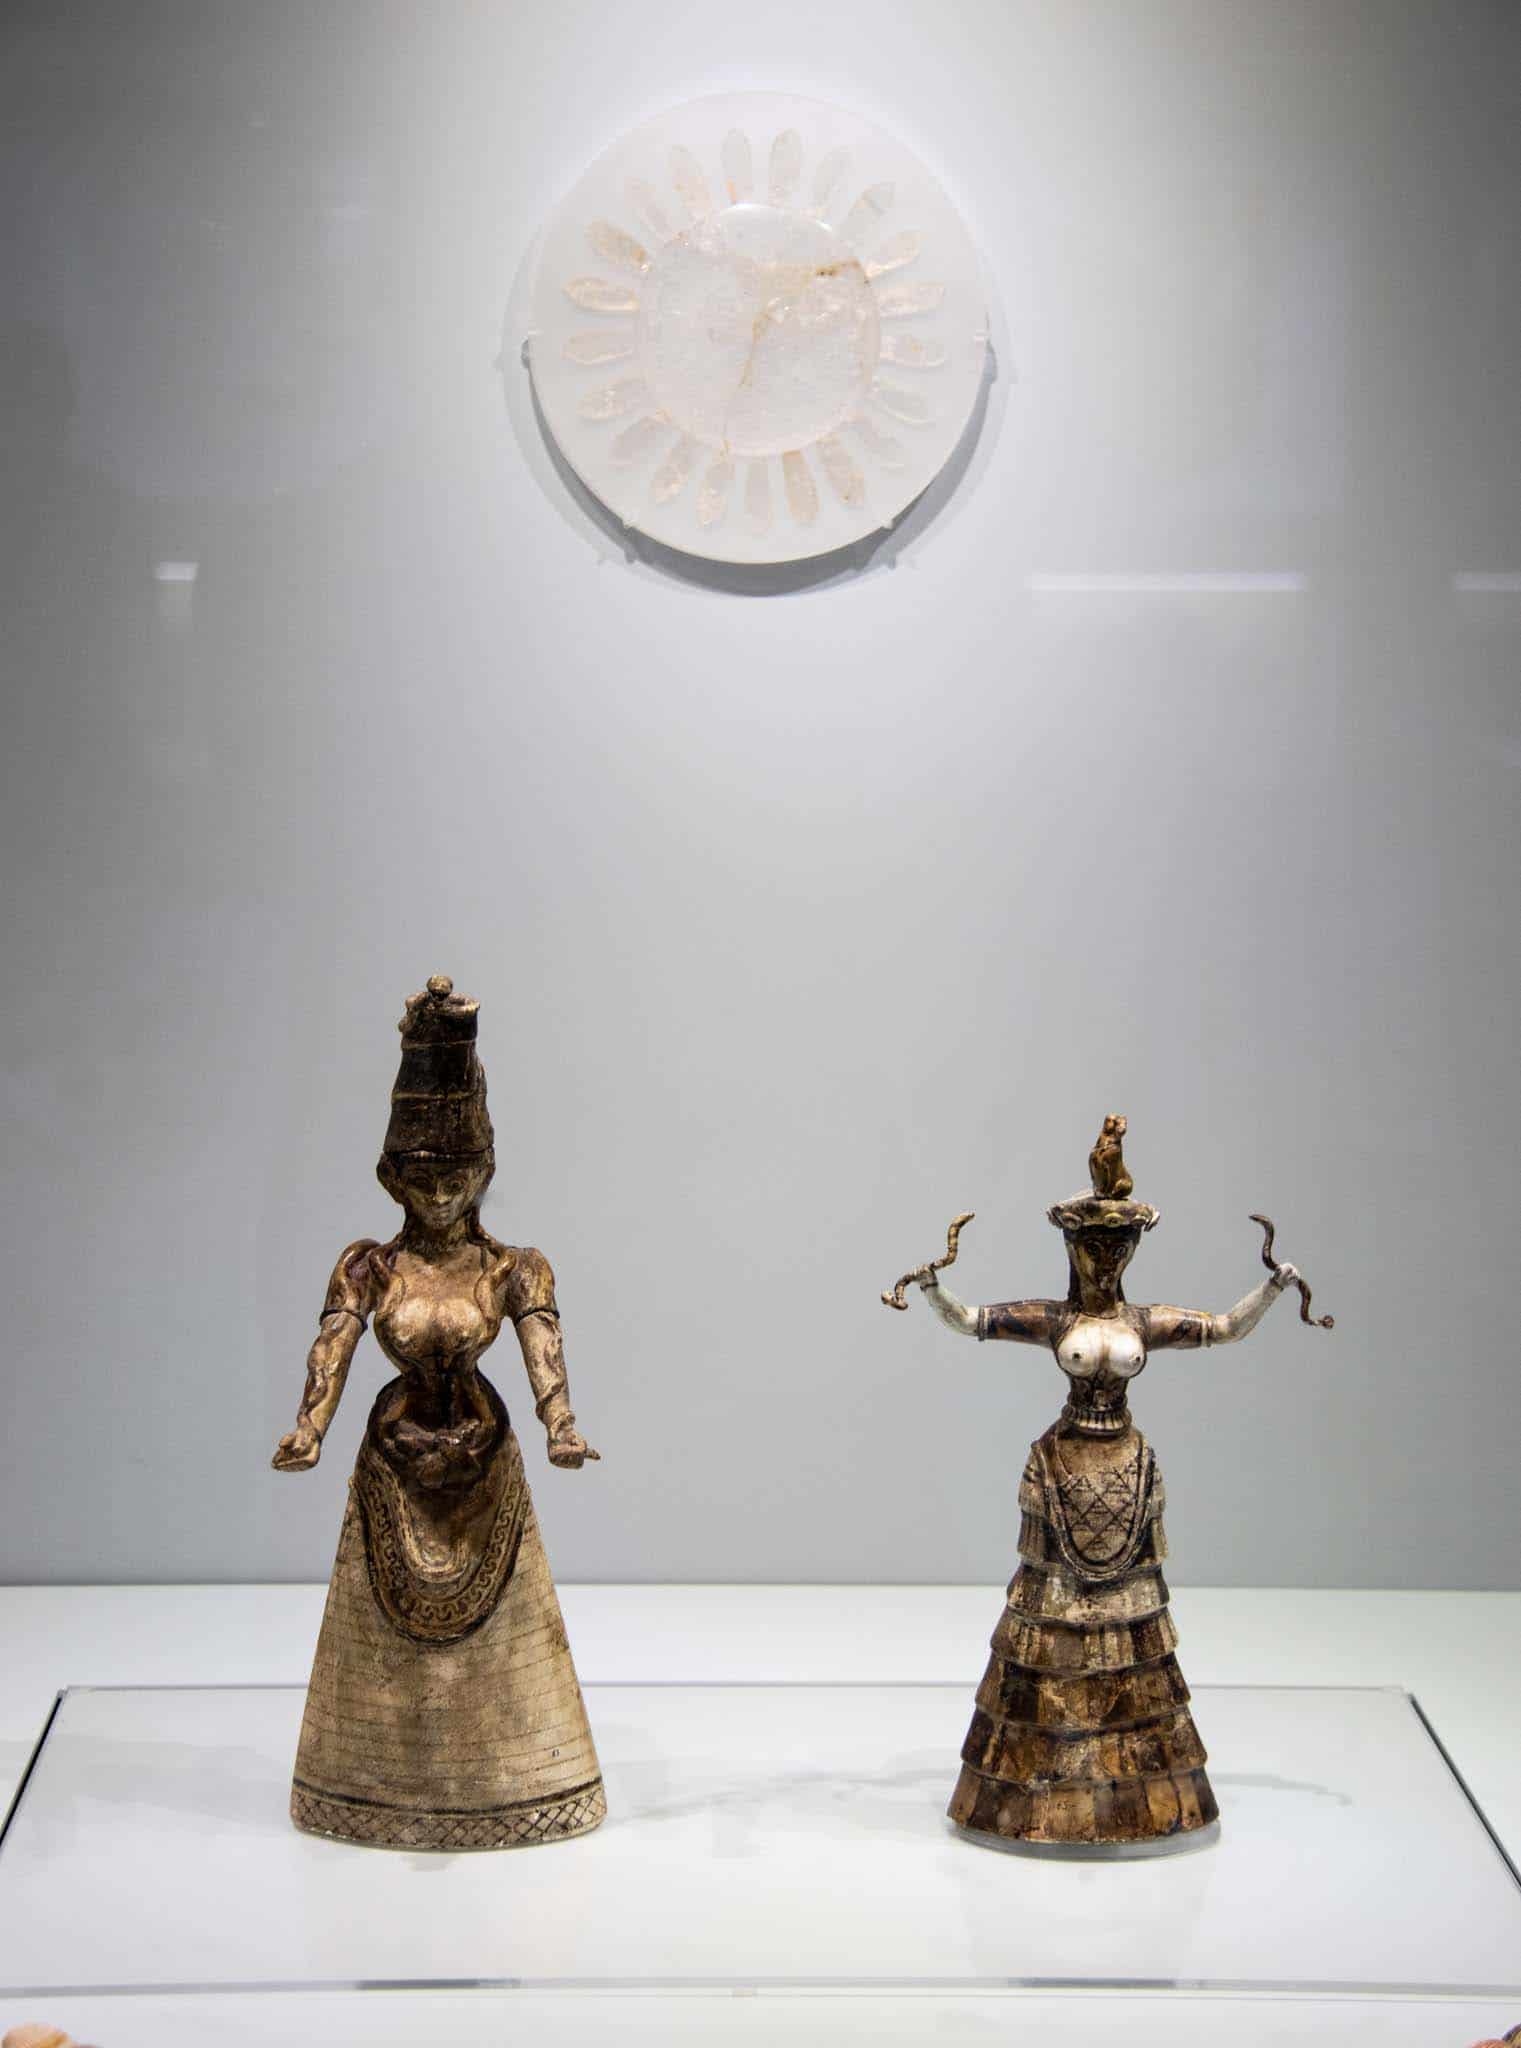 Minoan Snake Goddess and Priestess in the Heraklion Archaeological Museum. The snake goddess has snakes wrapped around her arms. The priestess holds a snake in each hand and has a Monkey on her head. Yes Louis - there's a monkey on her head!